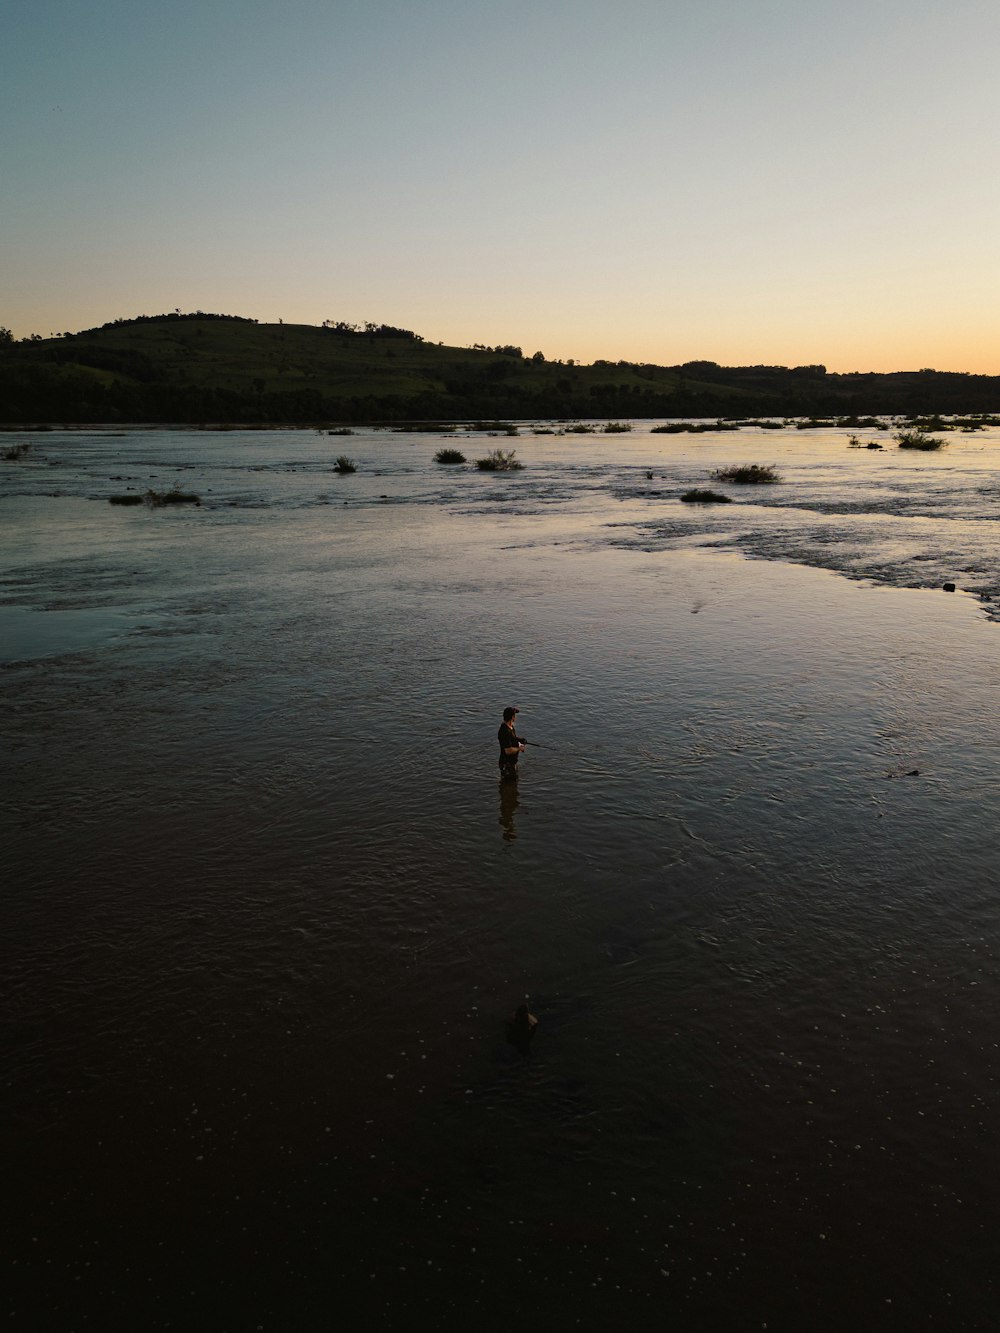 a person wading in shallow water at sunset